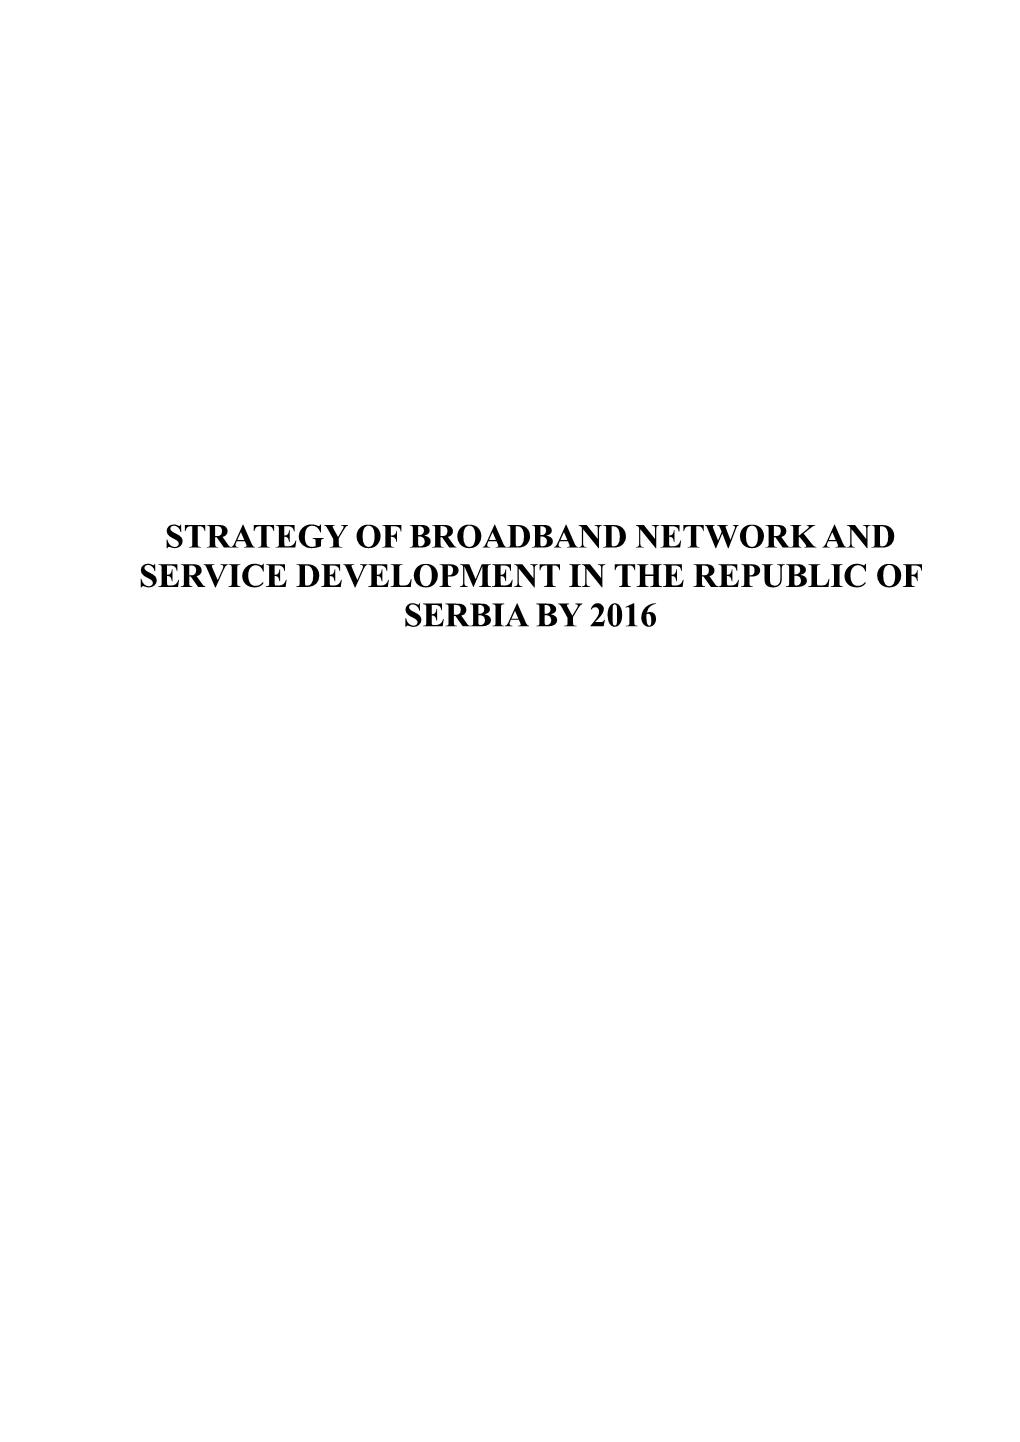 Strategy of Broadband Network and Service Development in the Republic of Serbia by 2016